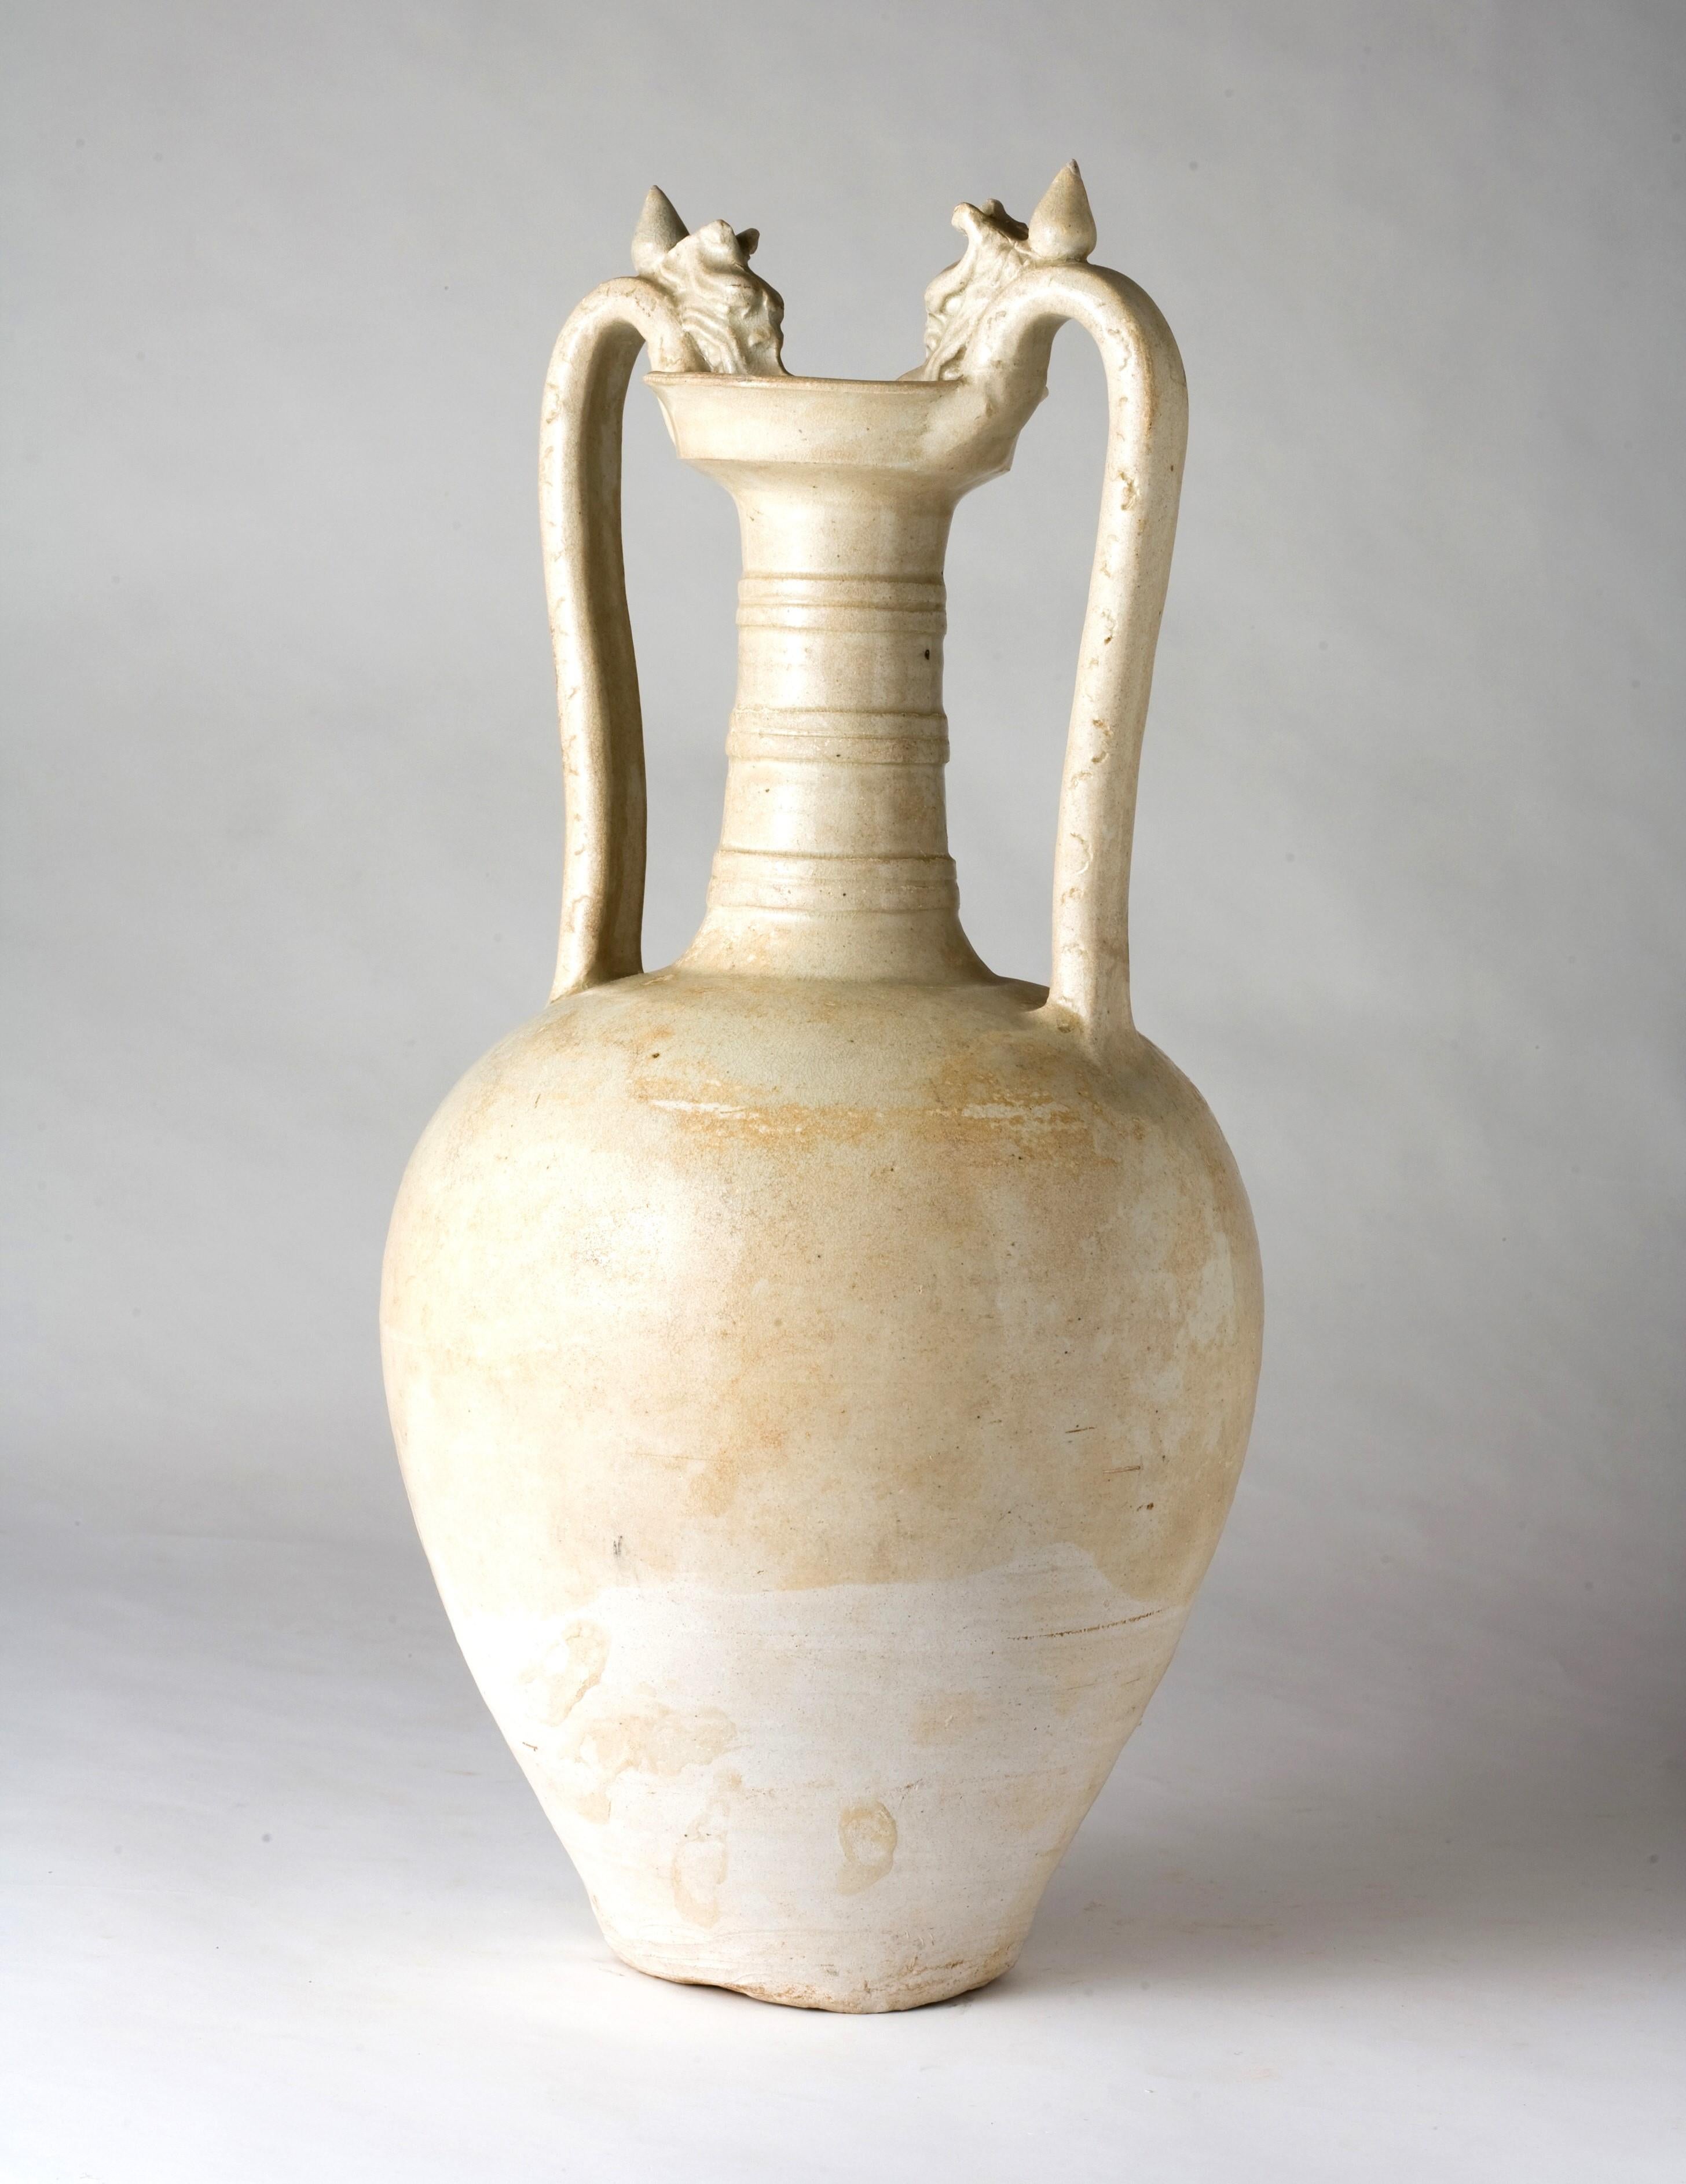 The long and complicated history of the shape illustrates the wide-ranging influences found in Chinese art in the seventh and eighth centuries. The ovoid shape suggests the “amphora” of Greece and Rome, while the animal-shaped handles allude to